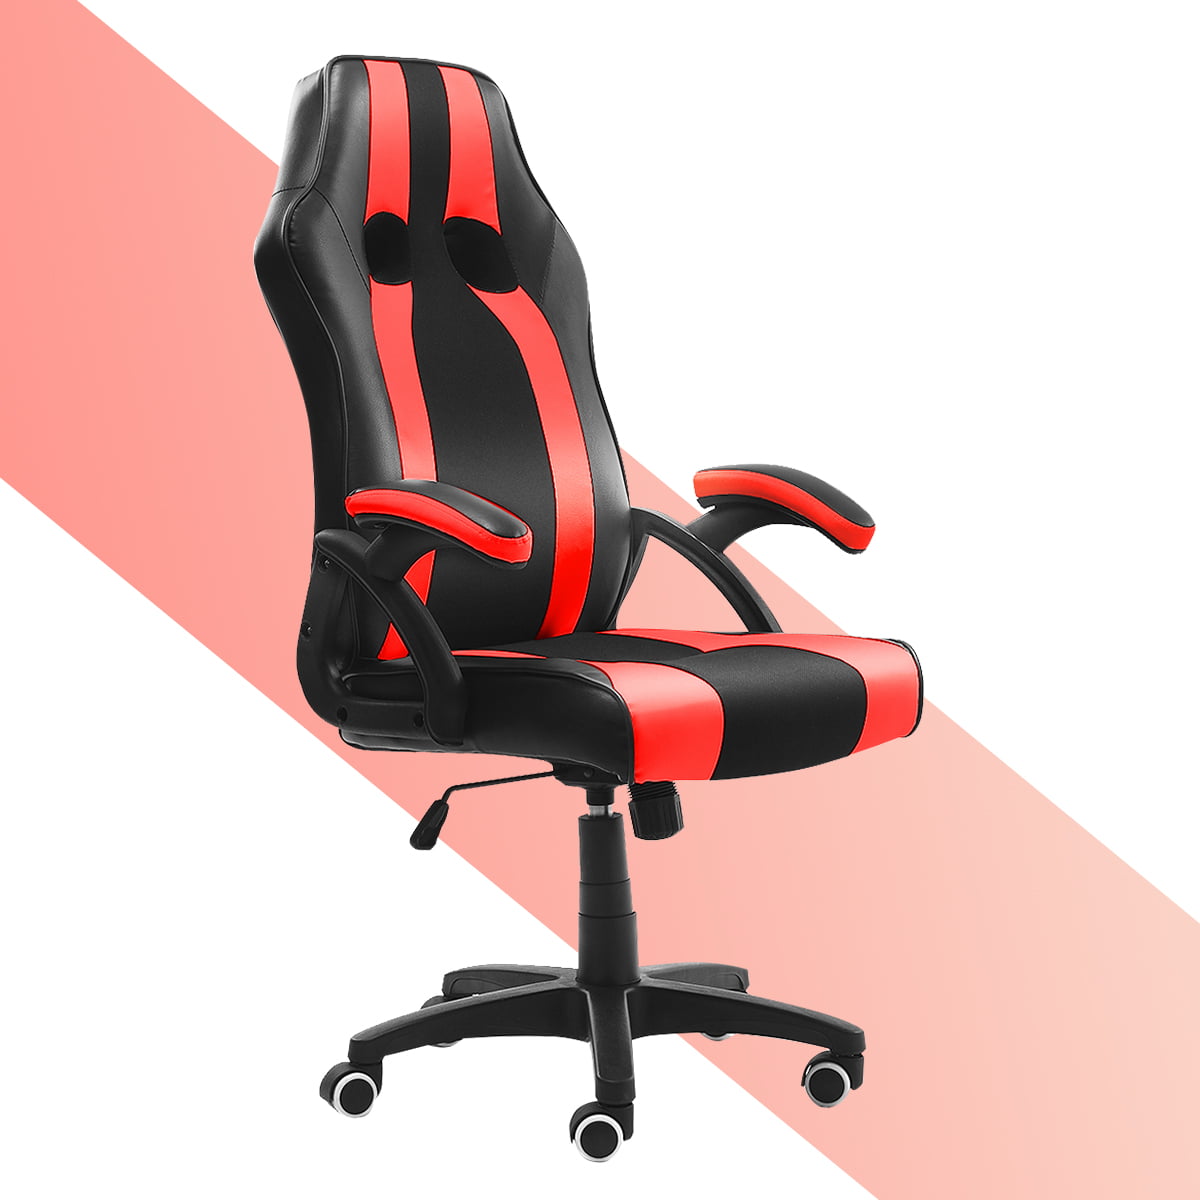 Details about   Swivel Racing Office Furniture Computer Gaming Chair High-back Chairs 